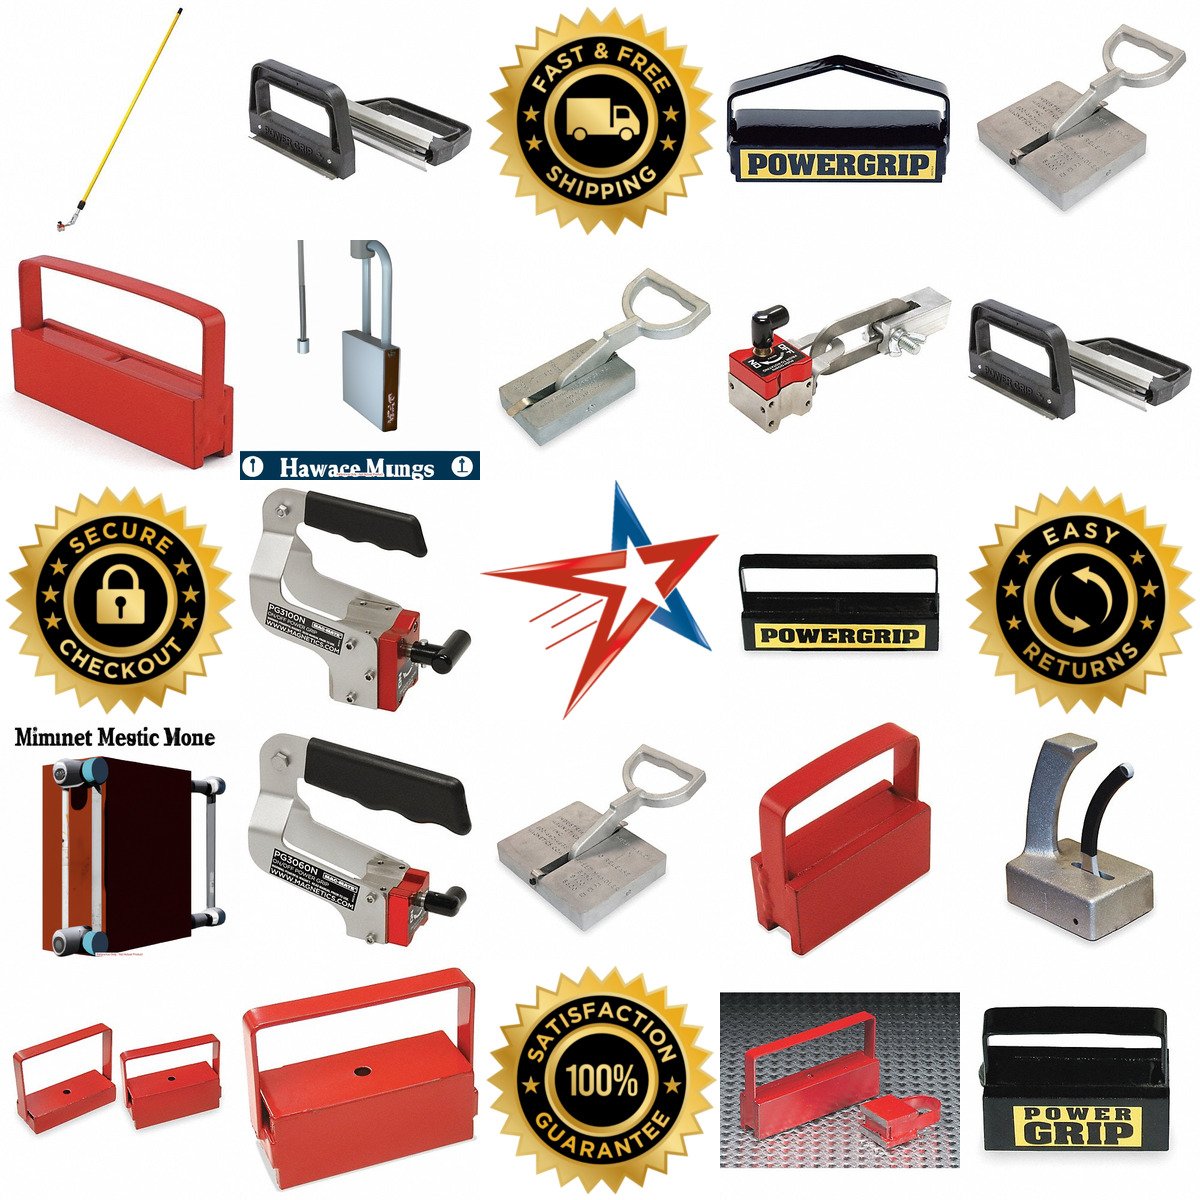 A selection of Manual Lifting Magnets products on GoVets